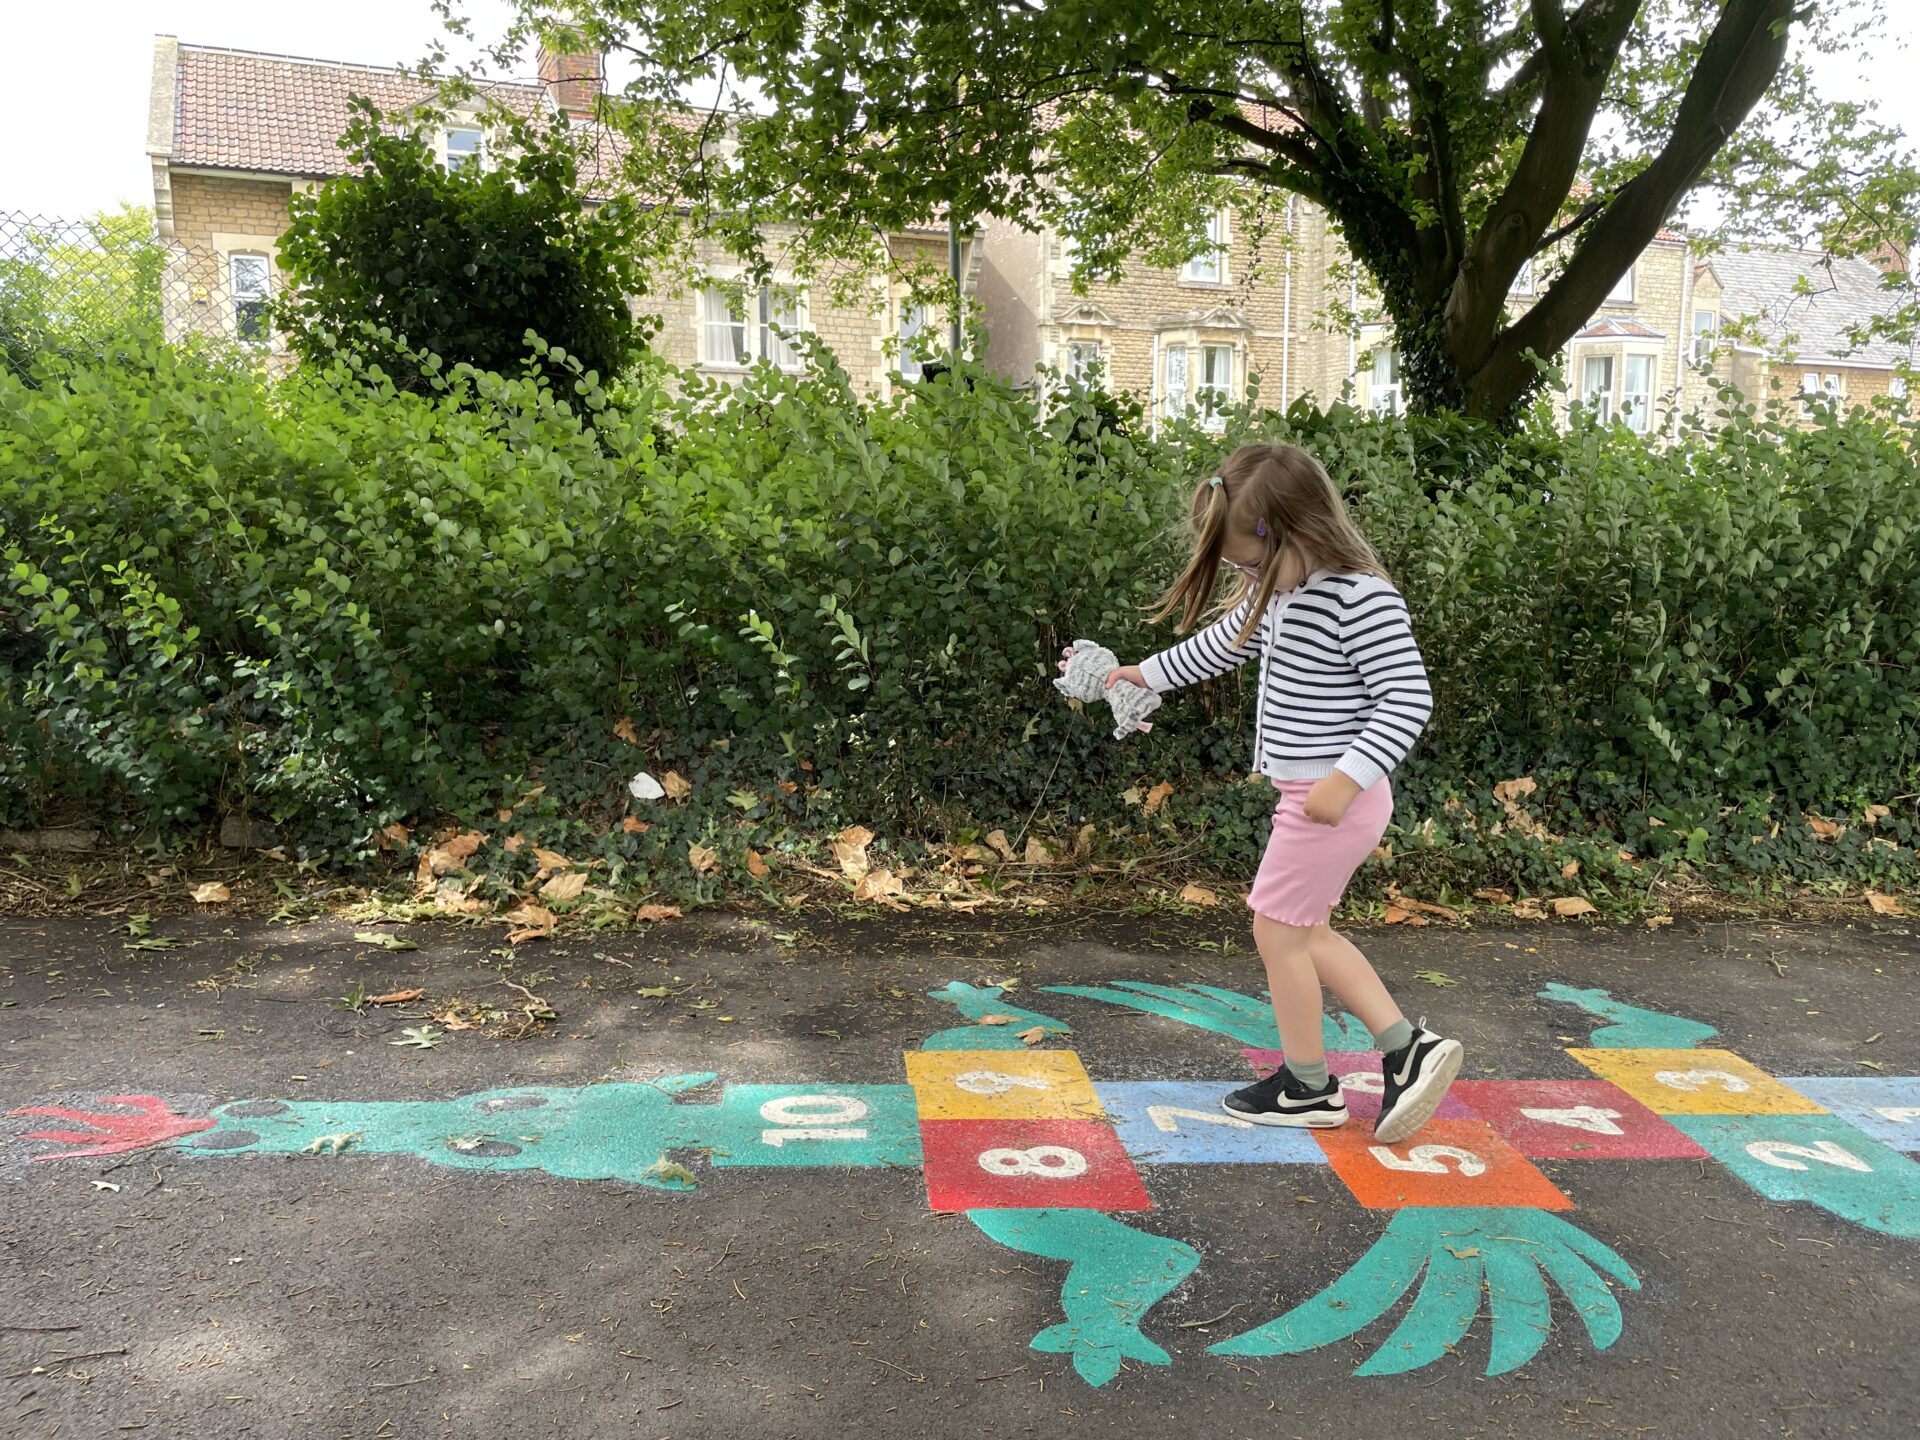 A girl plays on painted dragon hopscotch